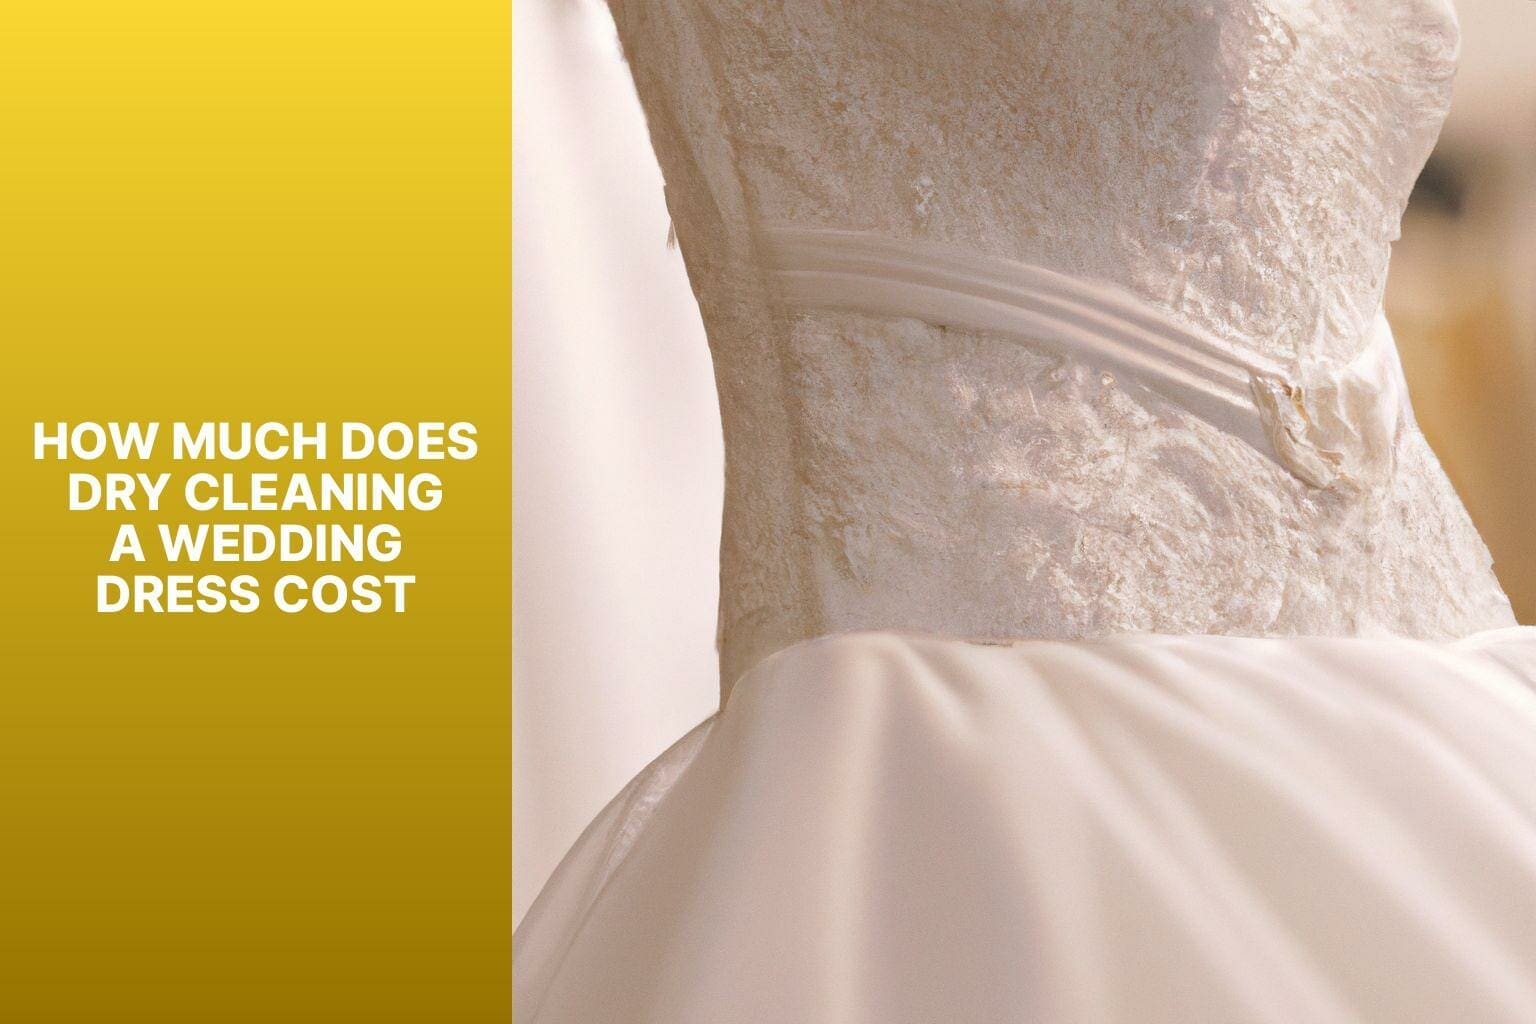 How much does dry cleaning a wedding dress cost?.